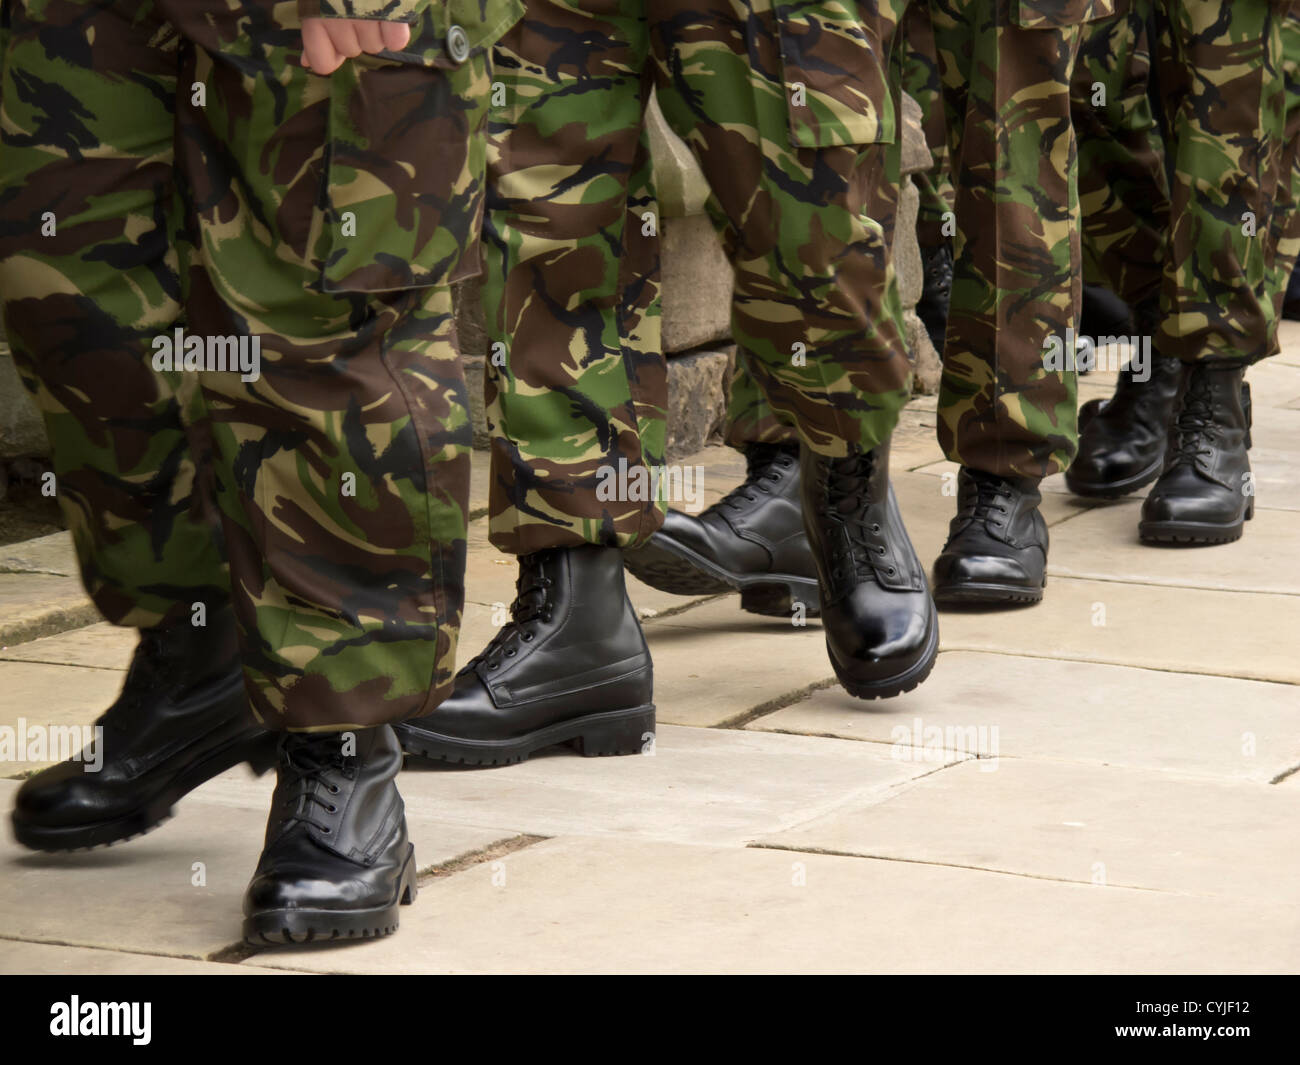 Soldiers black boots marching in line wearing camouflage military ...